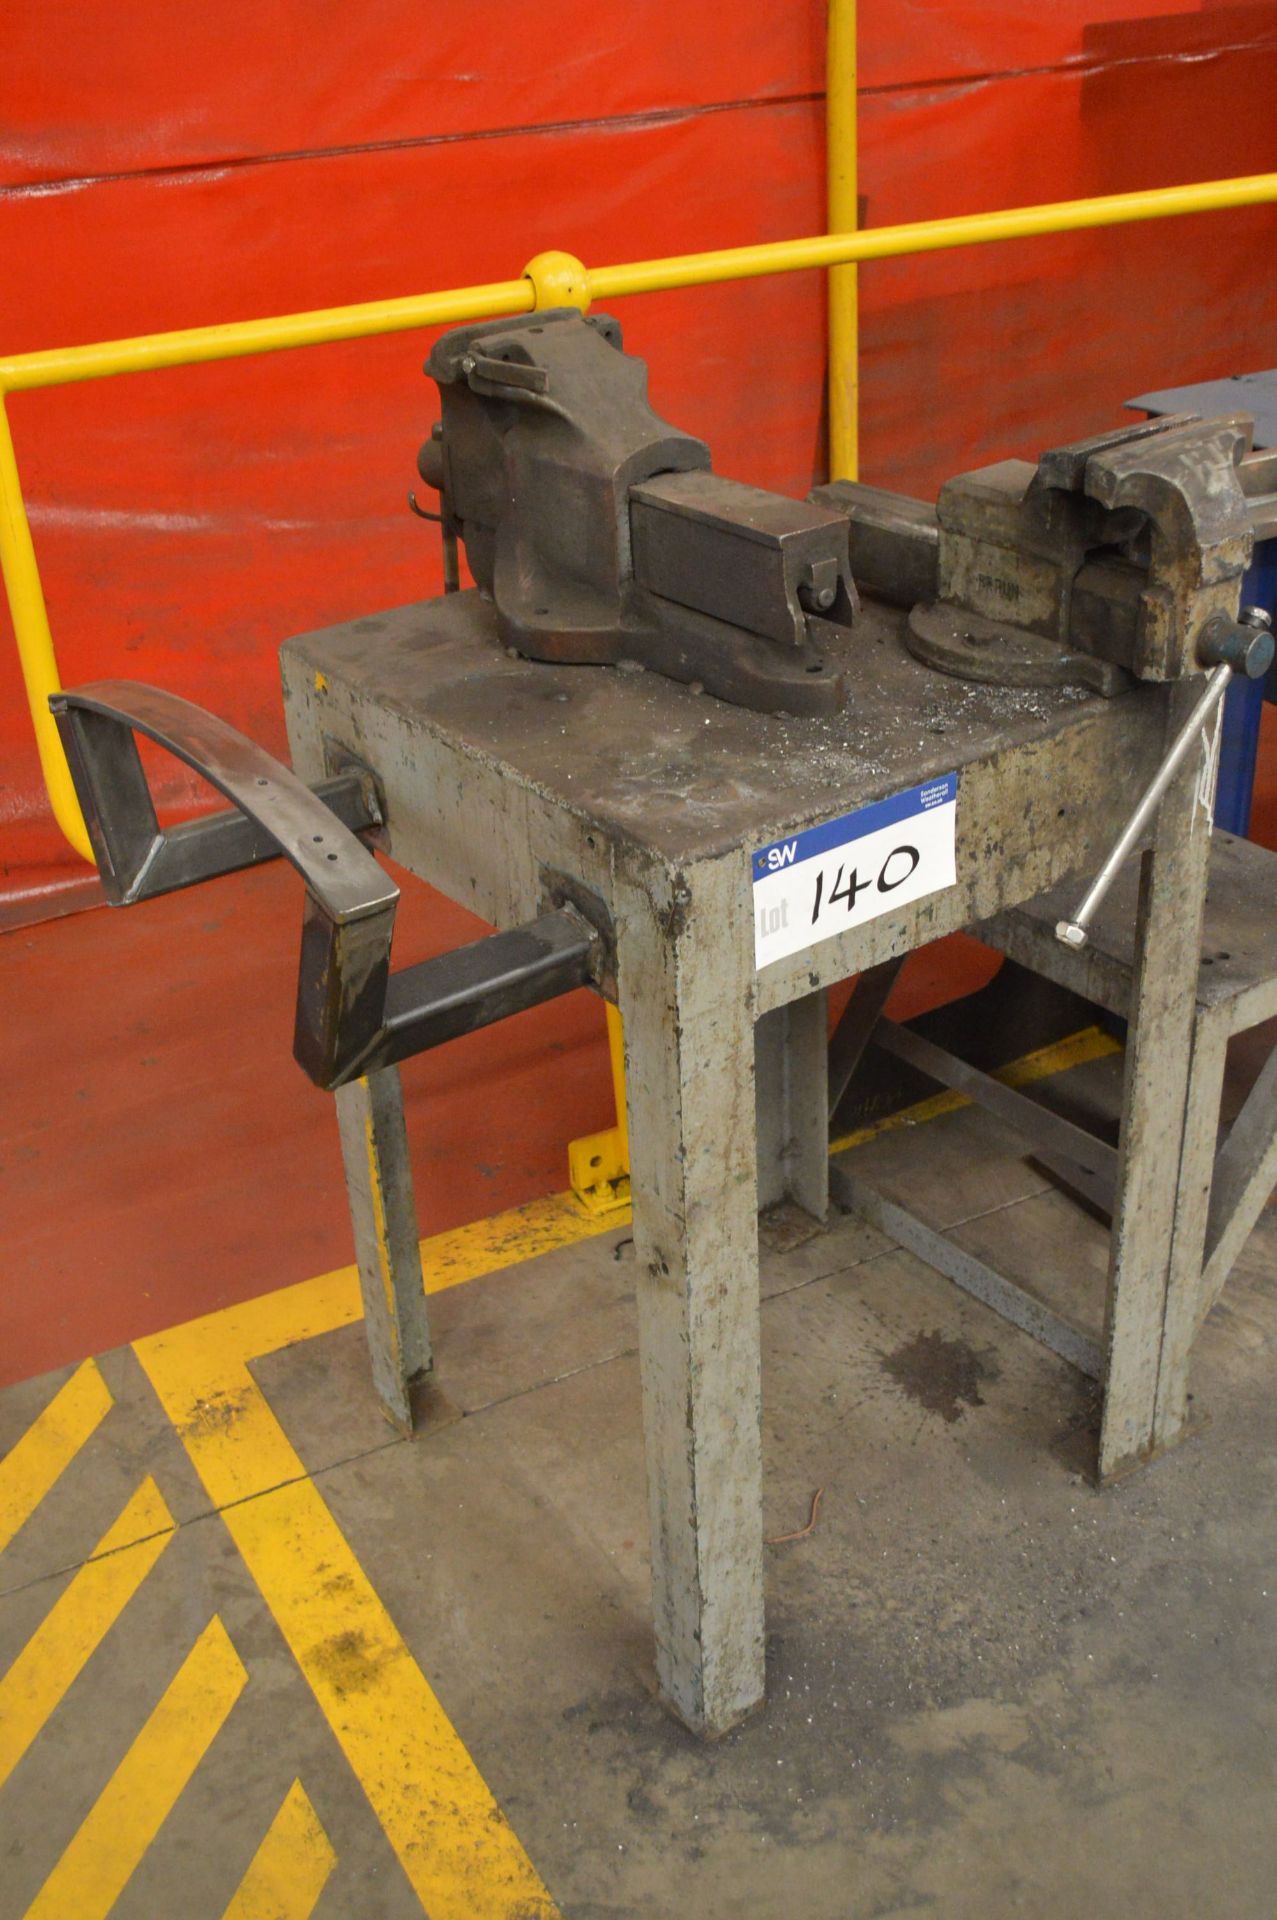 Fabricated Steel Bench, approx. 600mm x 600mm, with two engineers bench vices